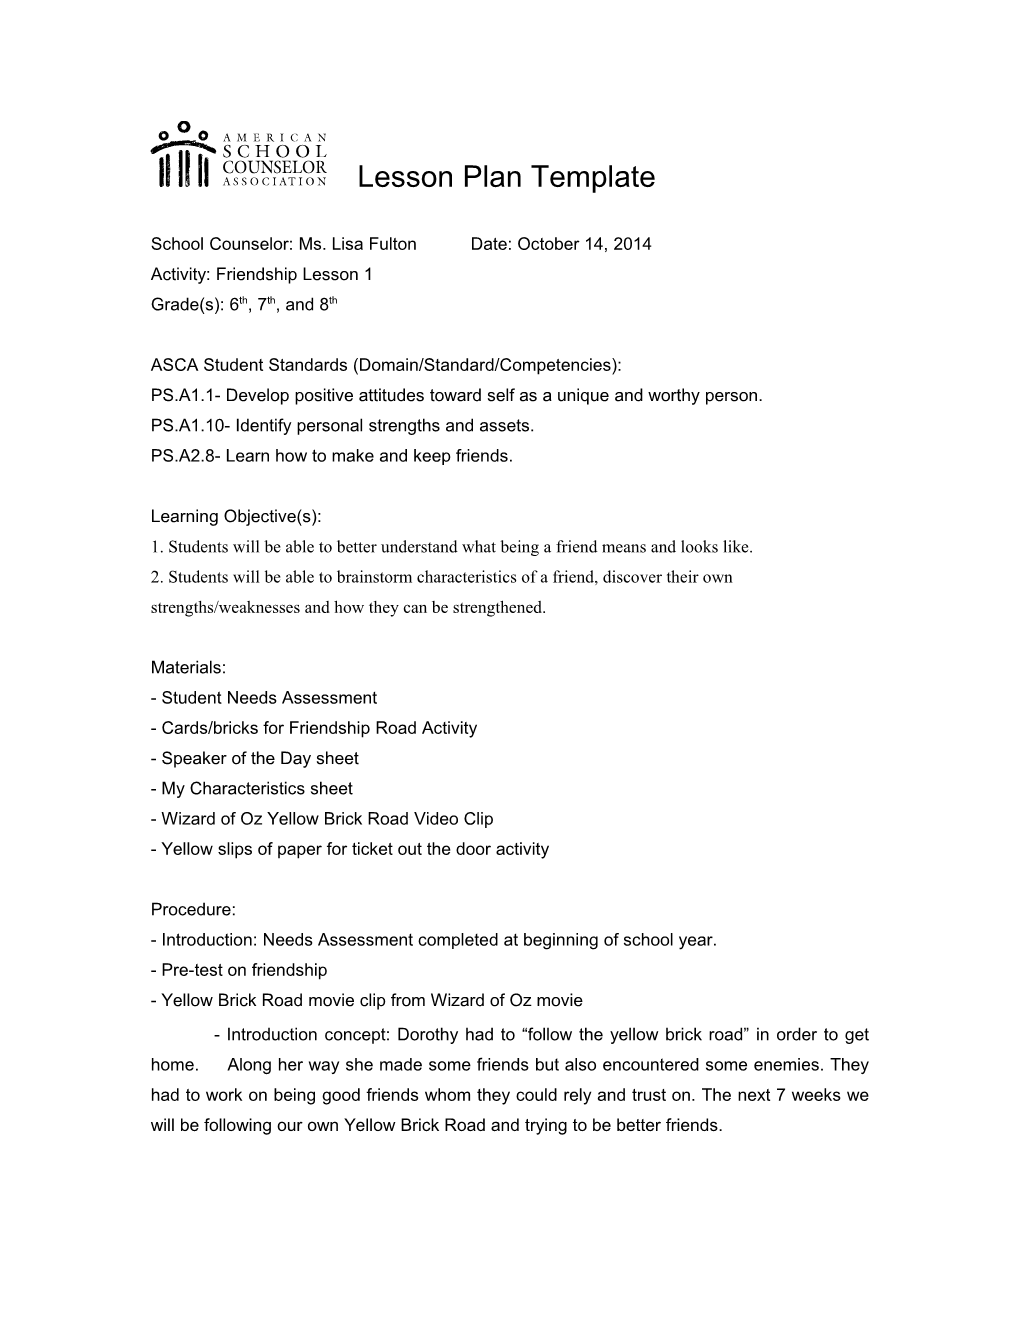 Lesson Plan Template s26